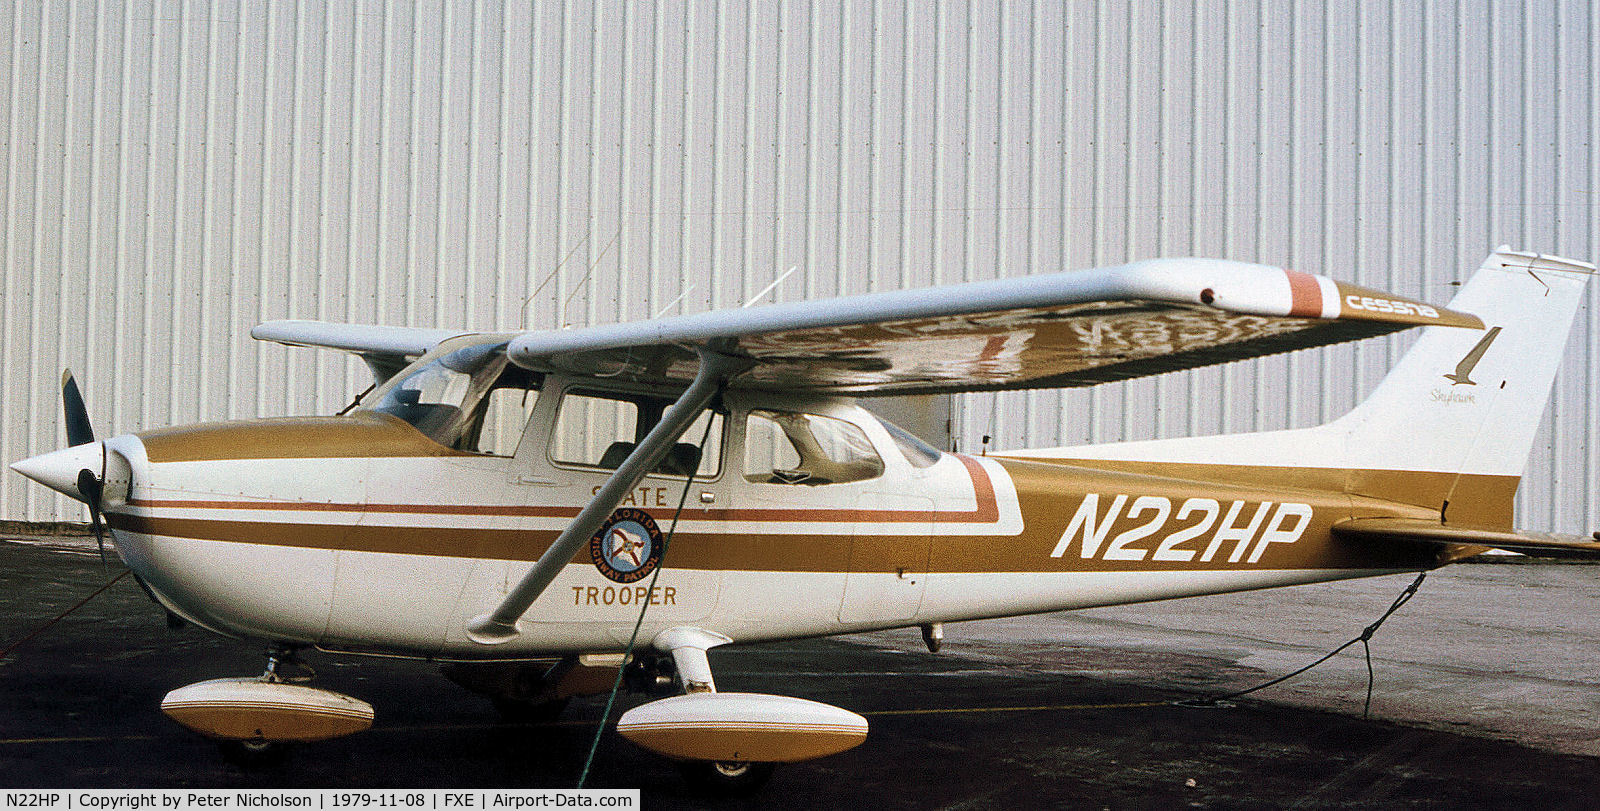 N22HP, 1973 Cessna 172M C/N 17261416, This Florida State Police Cessna 172M Skyhawk was seen at Fort Lauderdale Executive in November 1979.